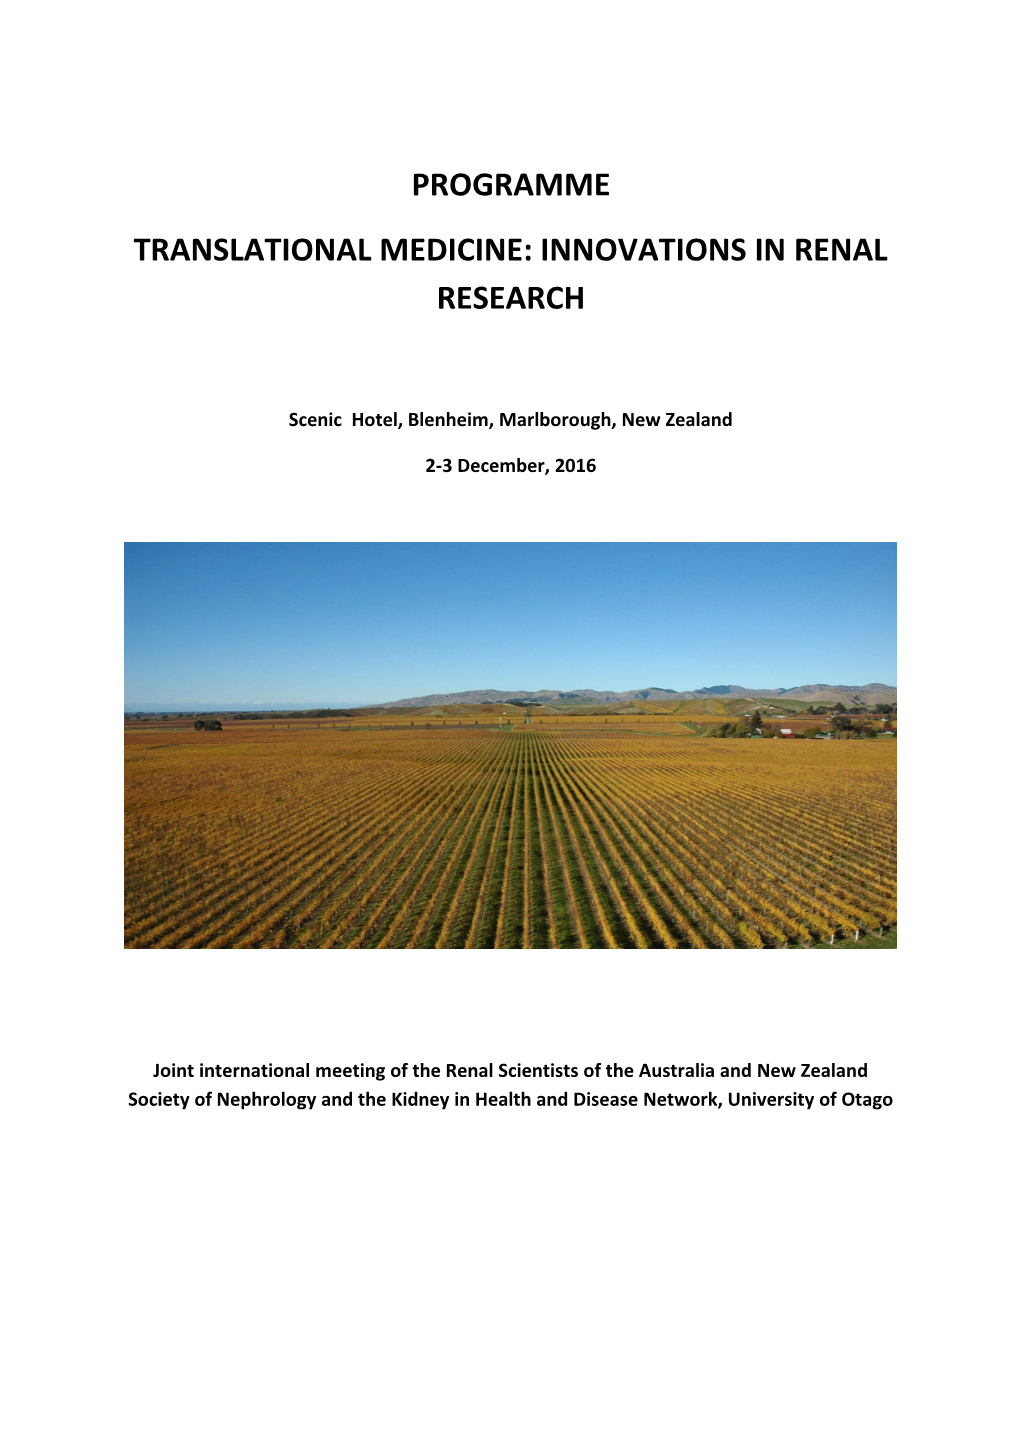 Translational Medicine: Innovations in Renal Research